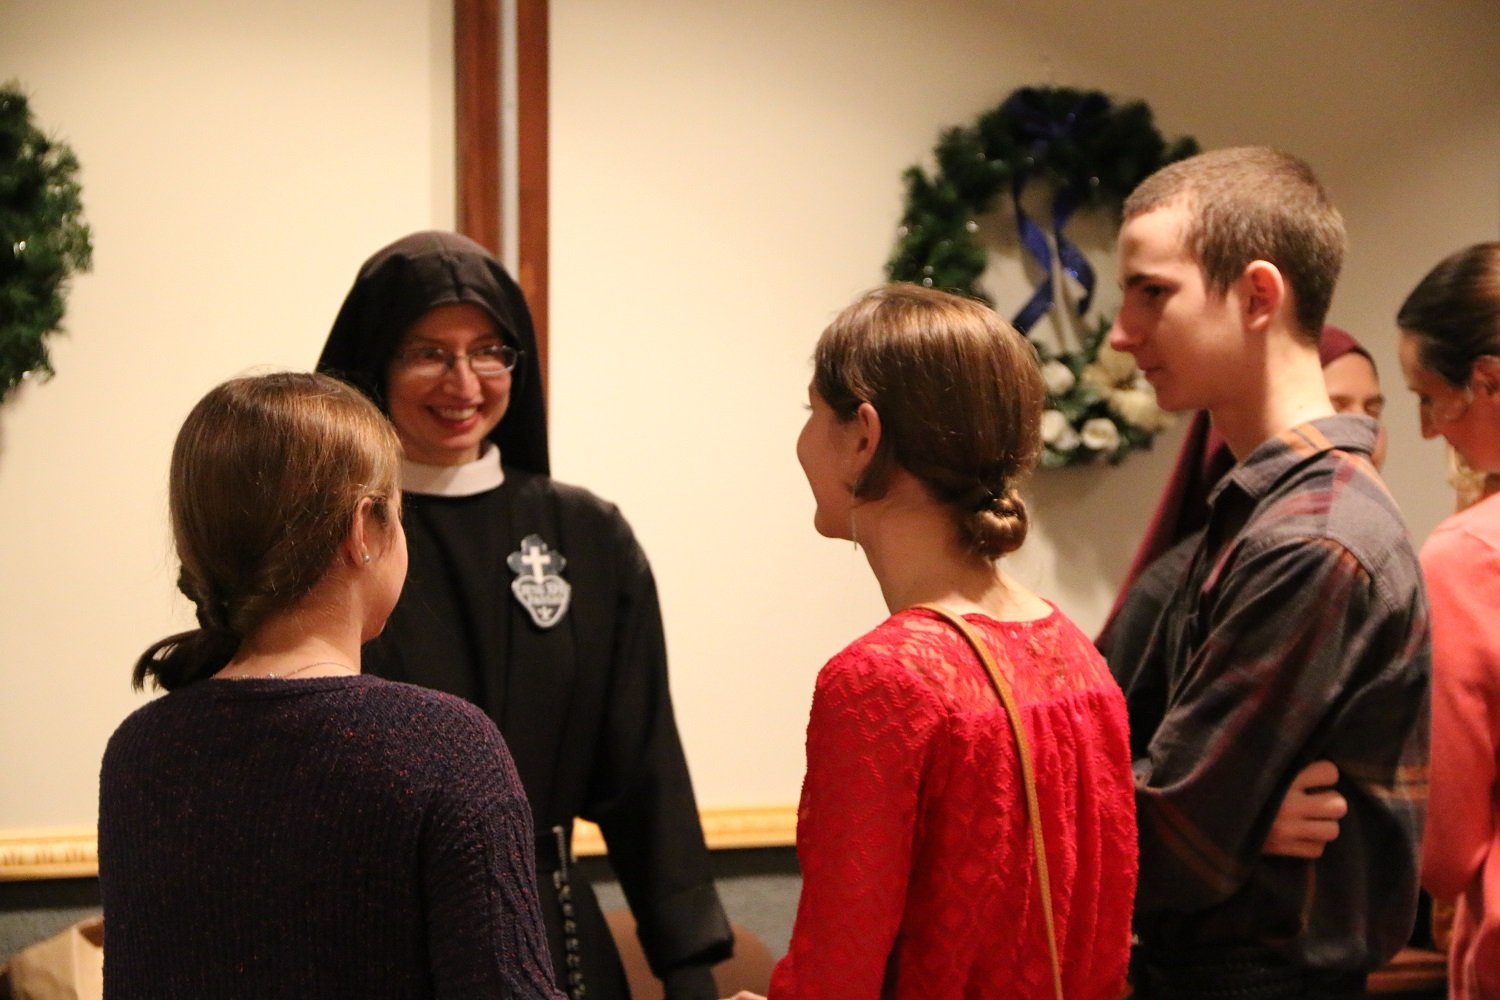  Sr. Cecilia Maria greets some young guests   (Photo: Elizabeth Wong Barnstead, Western KY Catholic)  